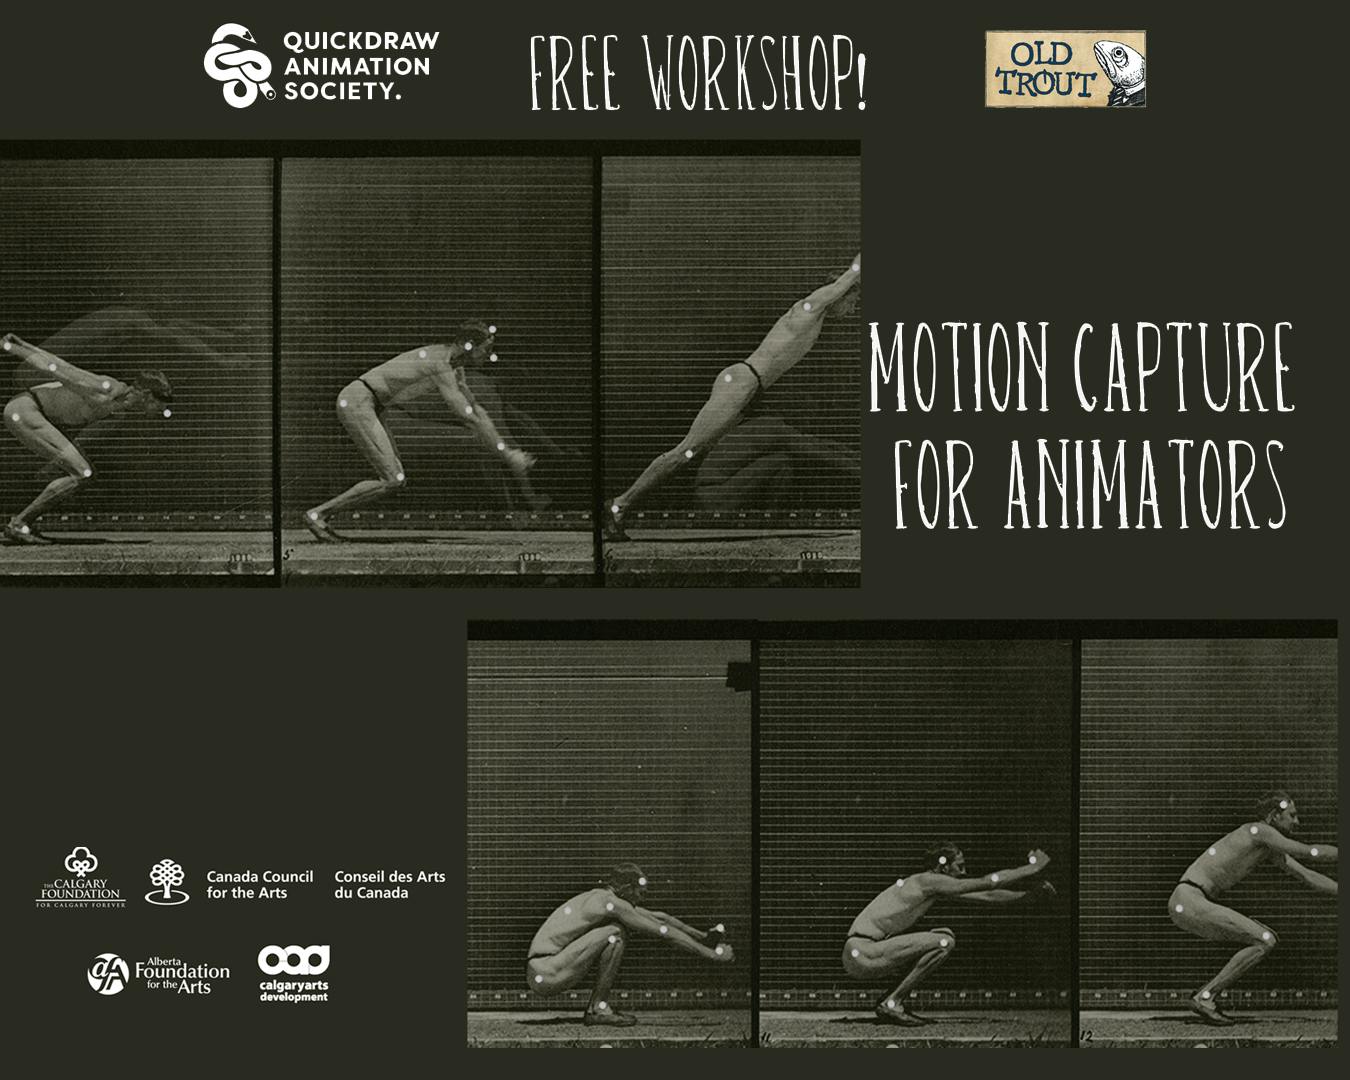 image of a person jumping while wearin gmotion capture trackers. Text reads "Quickdraw Animation Society Free Workshop!" "Old Trout" "Motion Capture for Animators" 
Logos of various government funders at the bottom: Calgary foundation, Canada Council for the Arts, Alberta Foundation of the Arts, Calgary Arts Development.